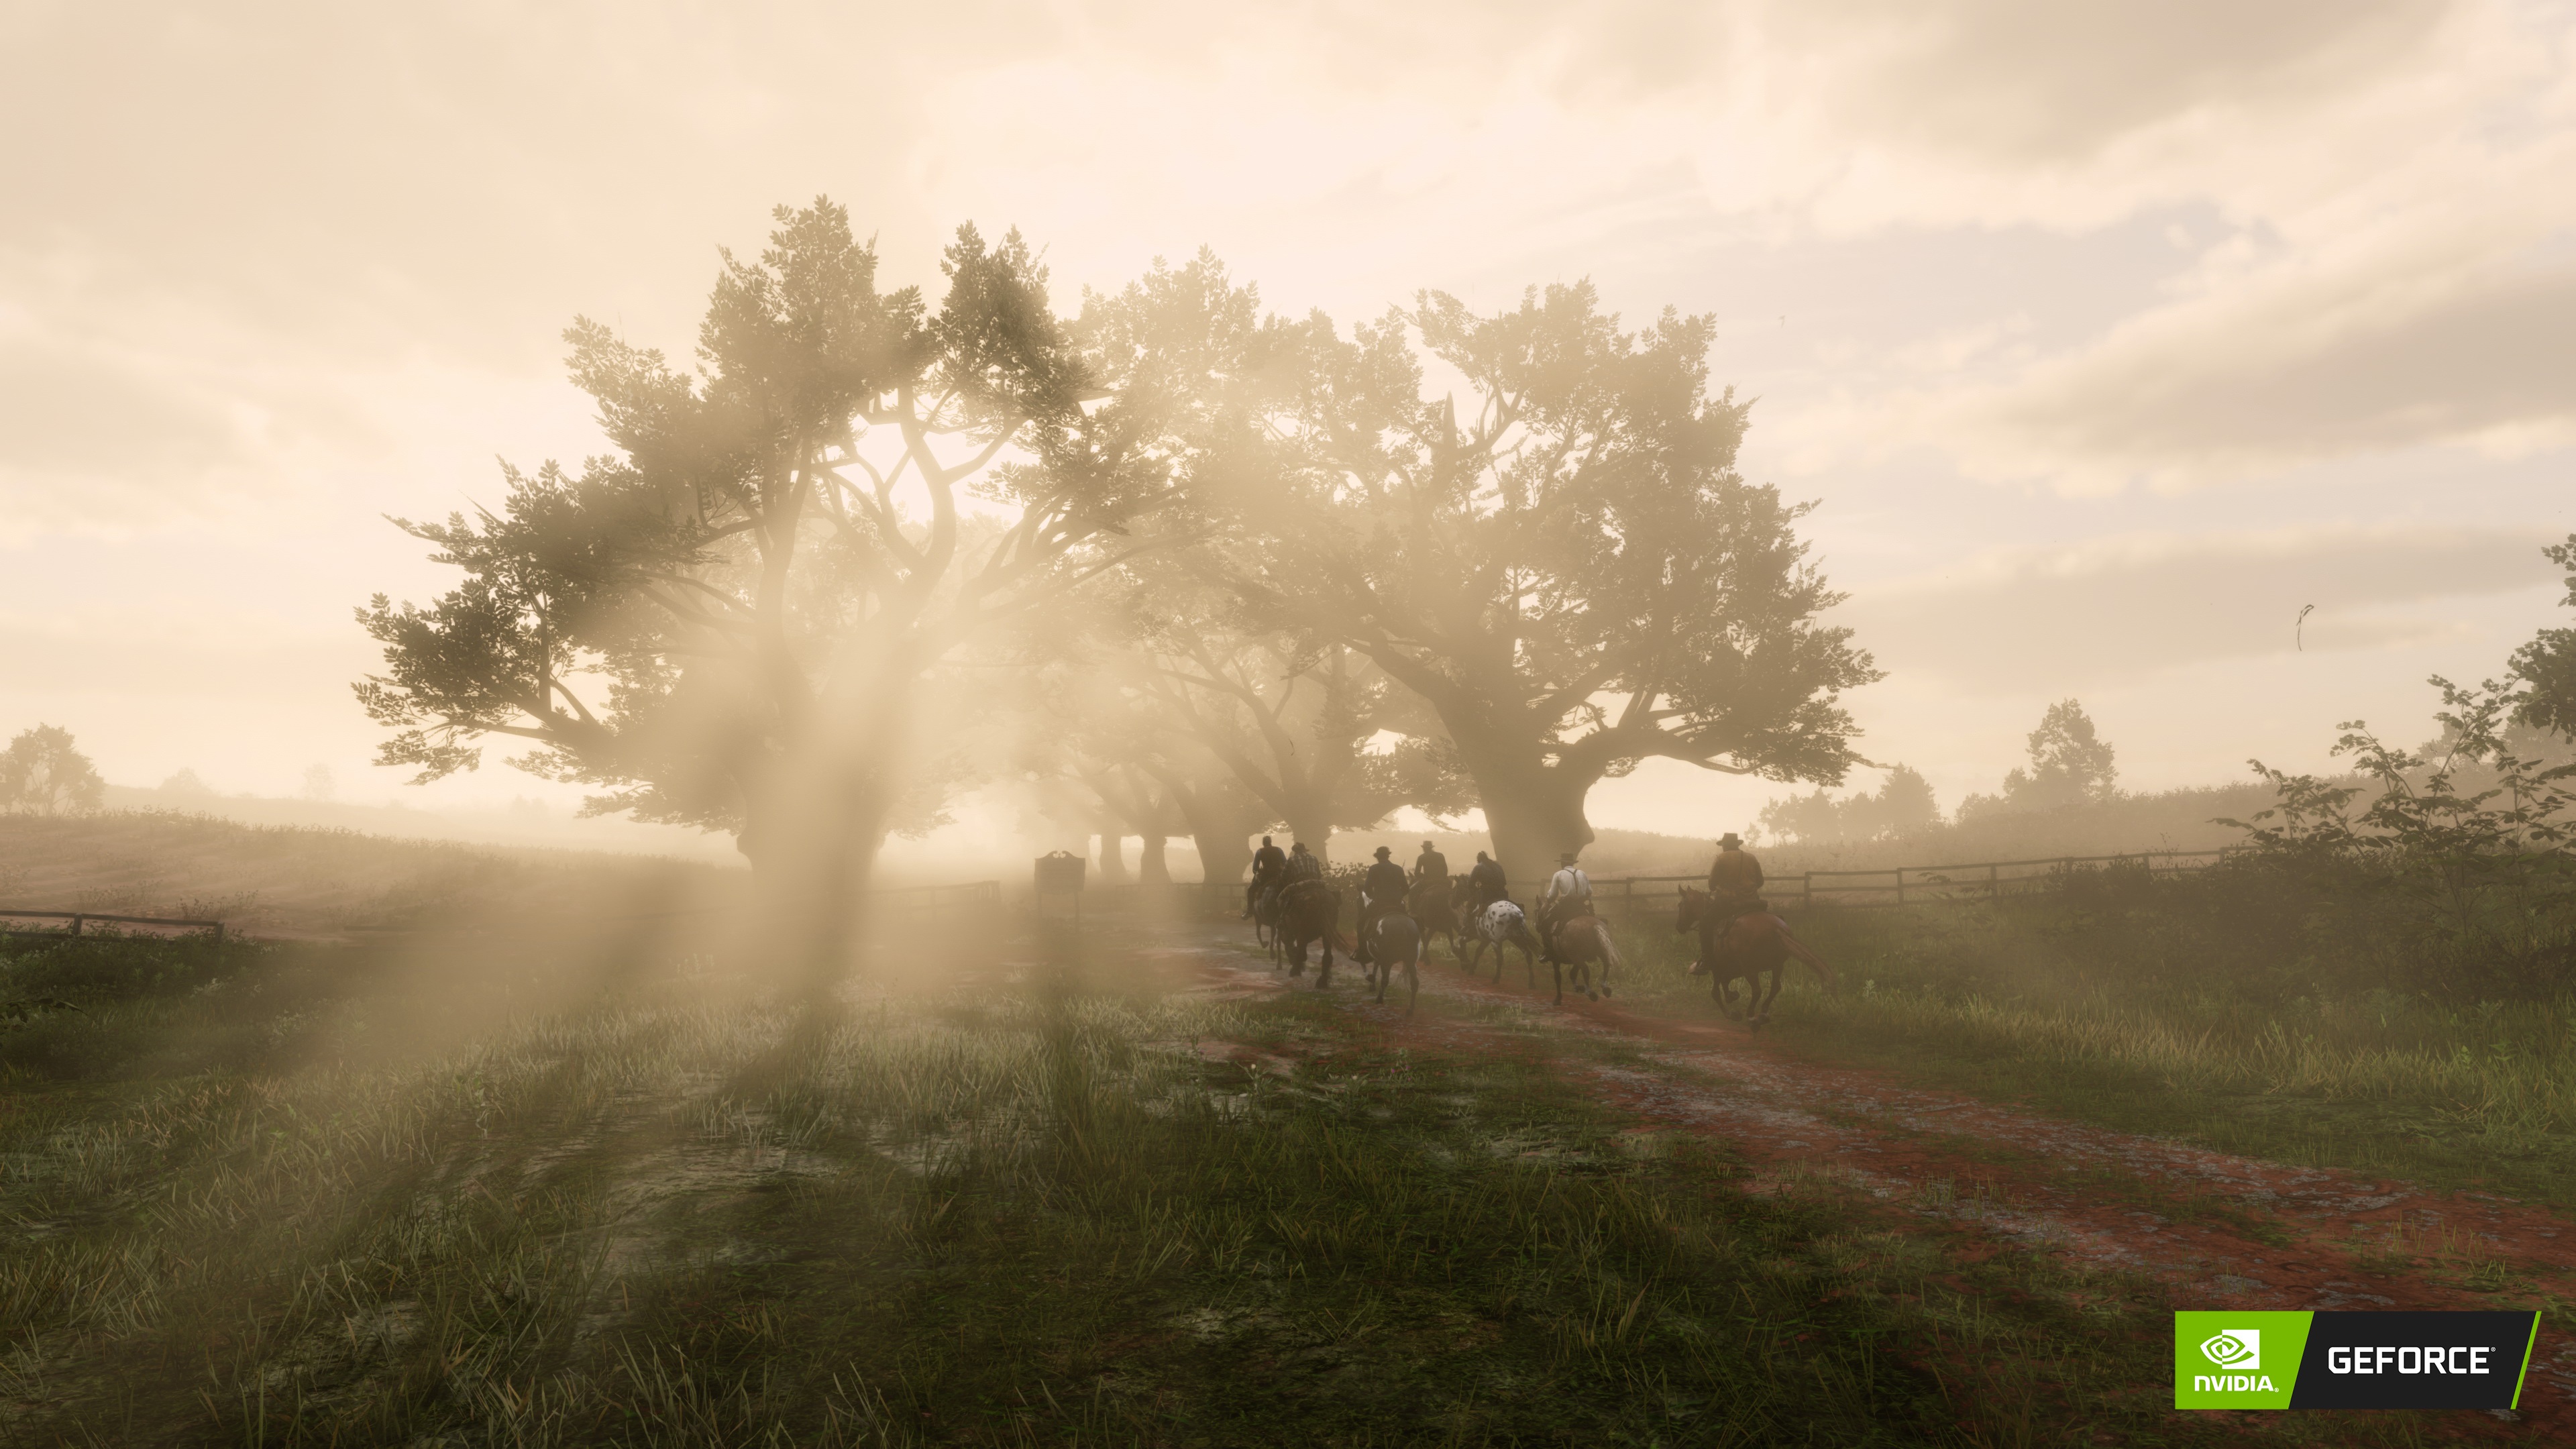 Red Dead Redemption 2: NVIDIA's Recommended GPUs For 60+ FPS Gameplay, GeForce News